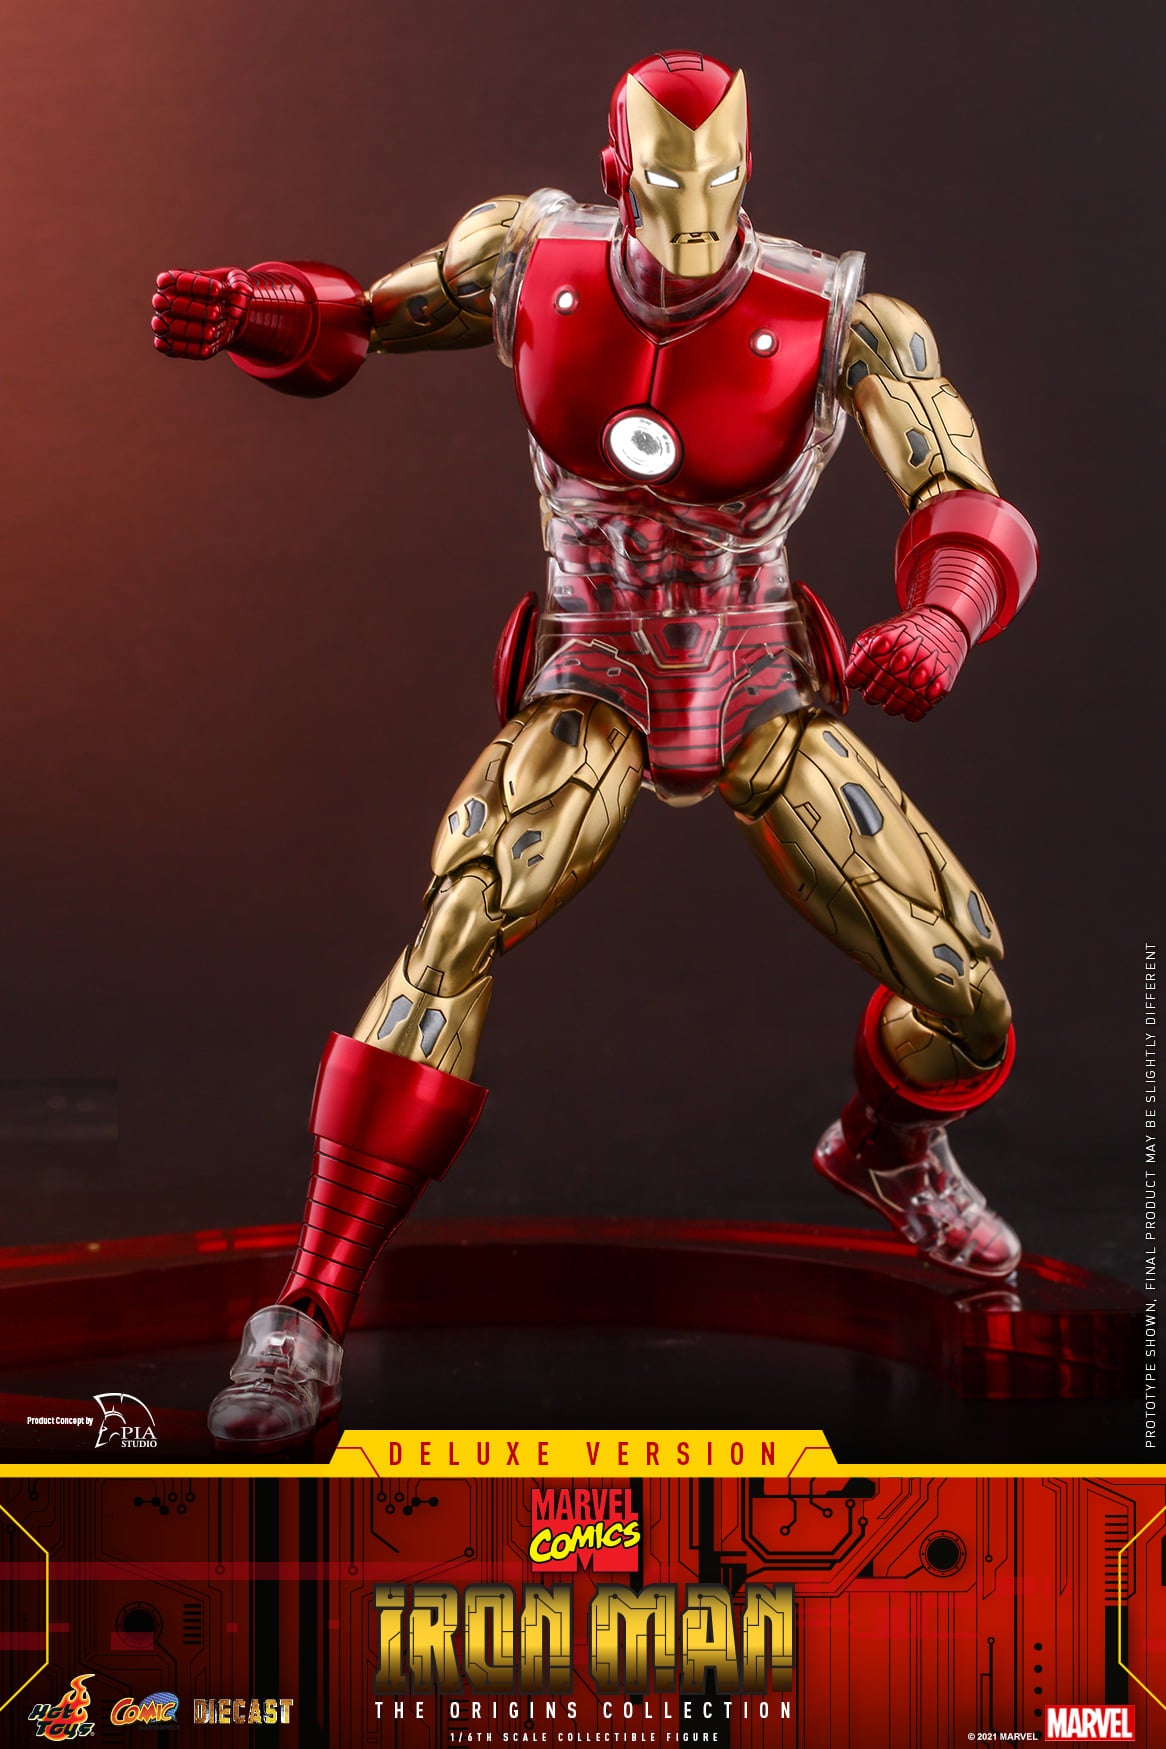 Iron Man (The Origins Collection) Deluxe 1/6 - Marvel Comics Hot Toys Die-Cast Metal